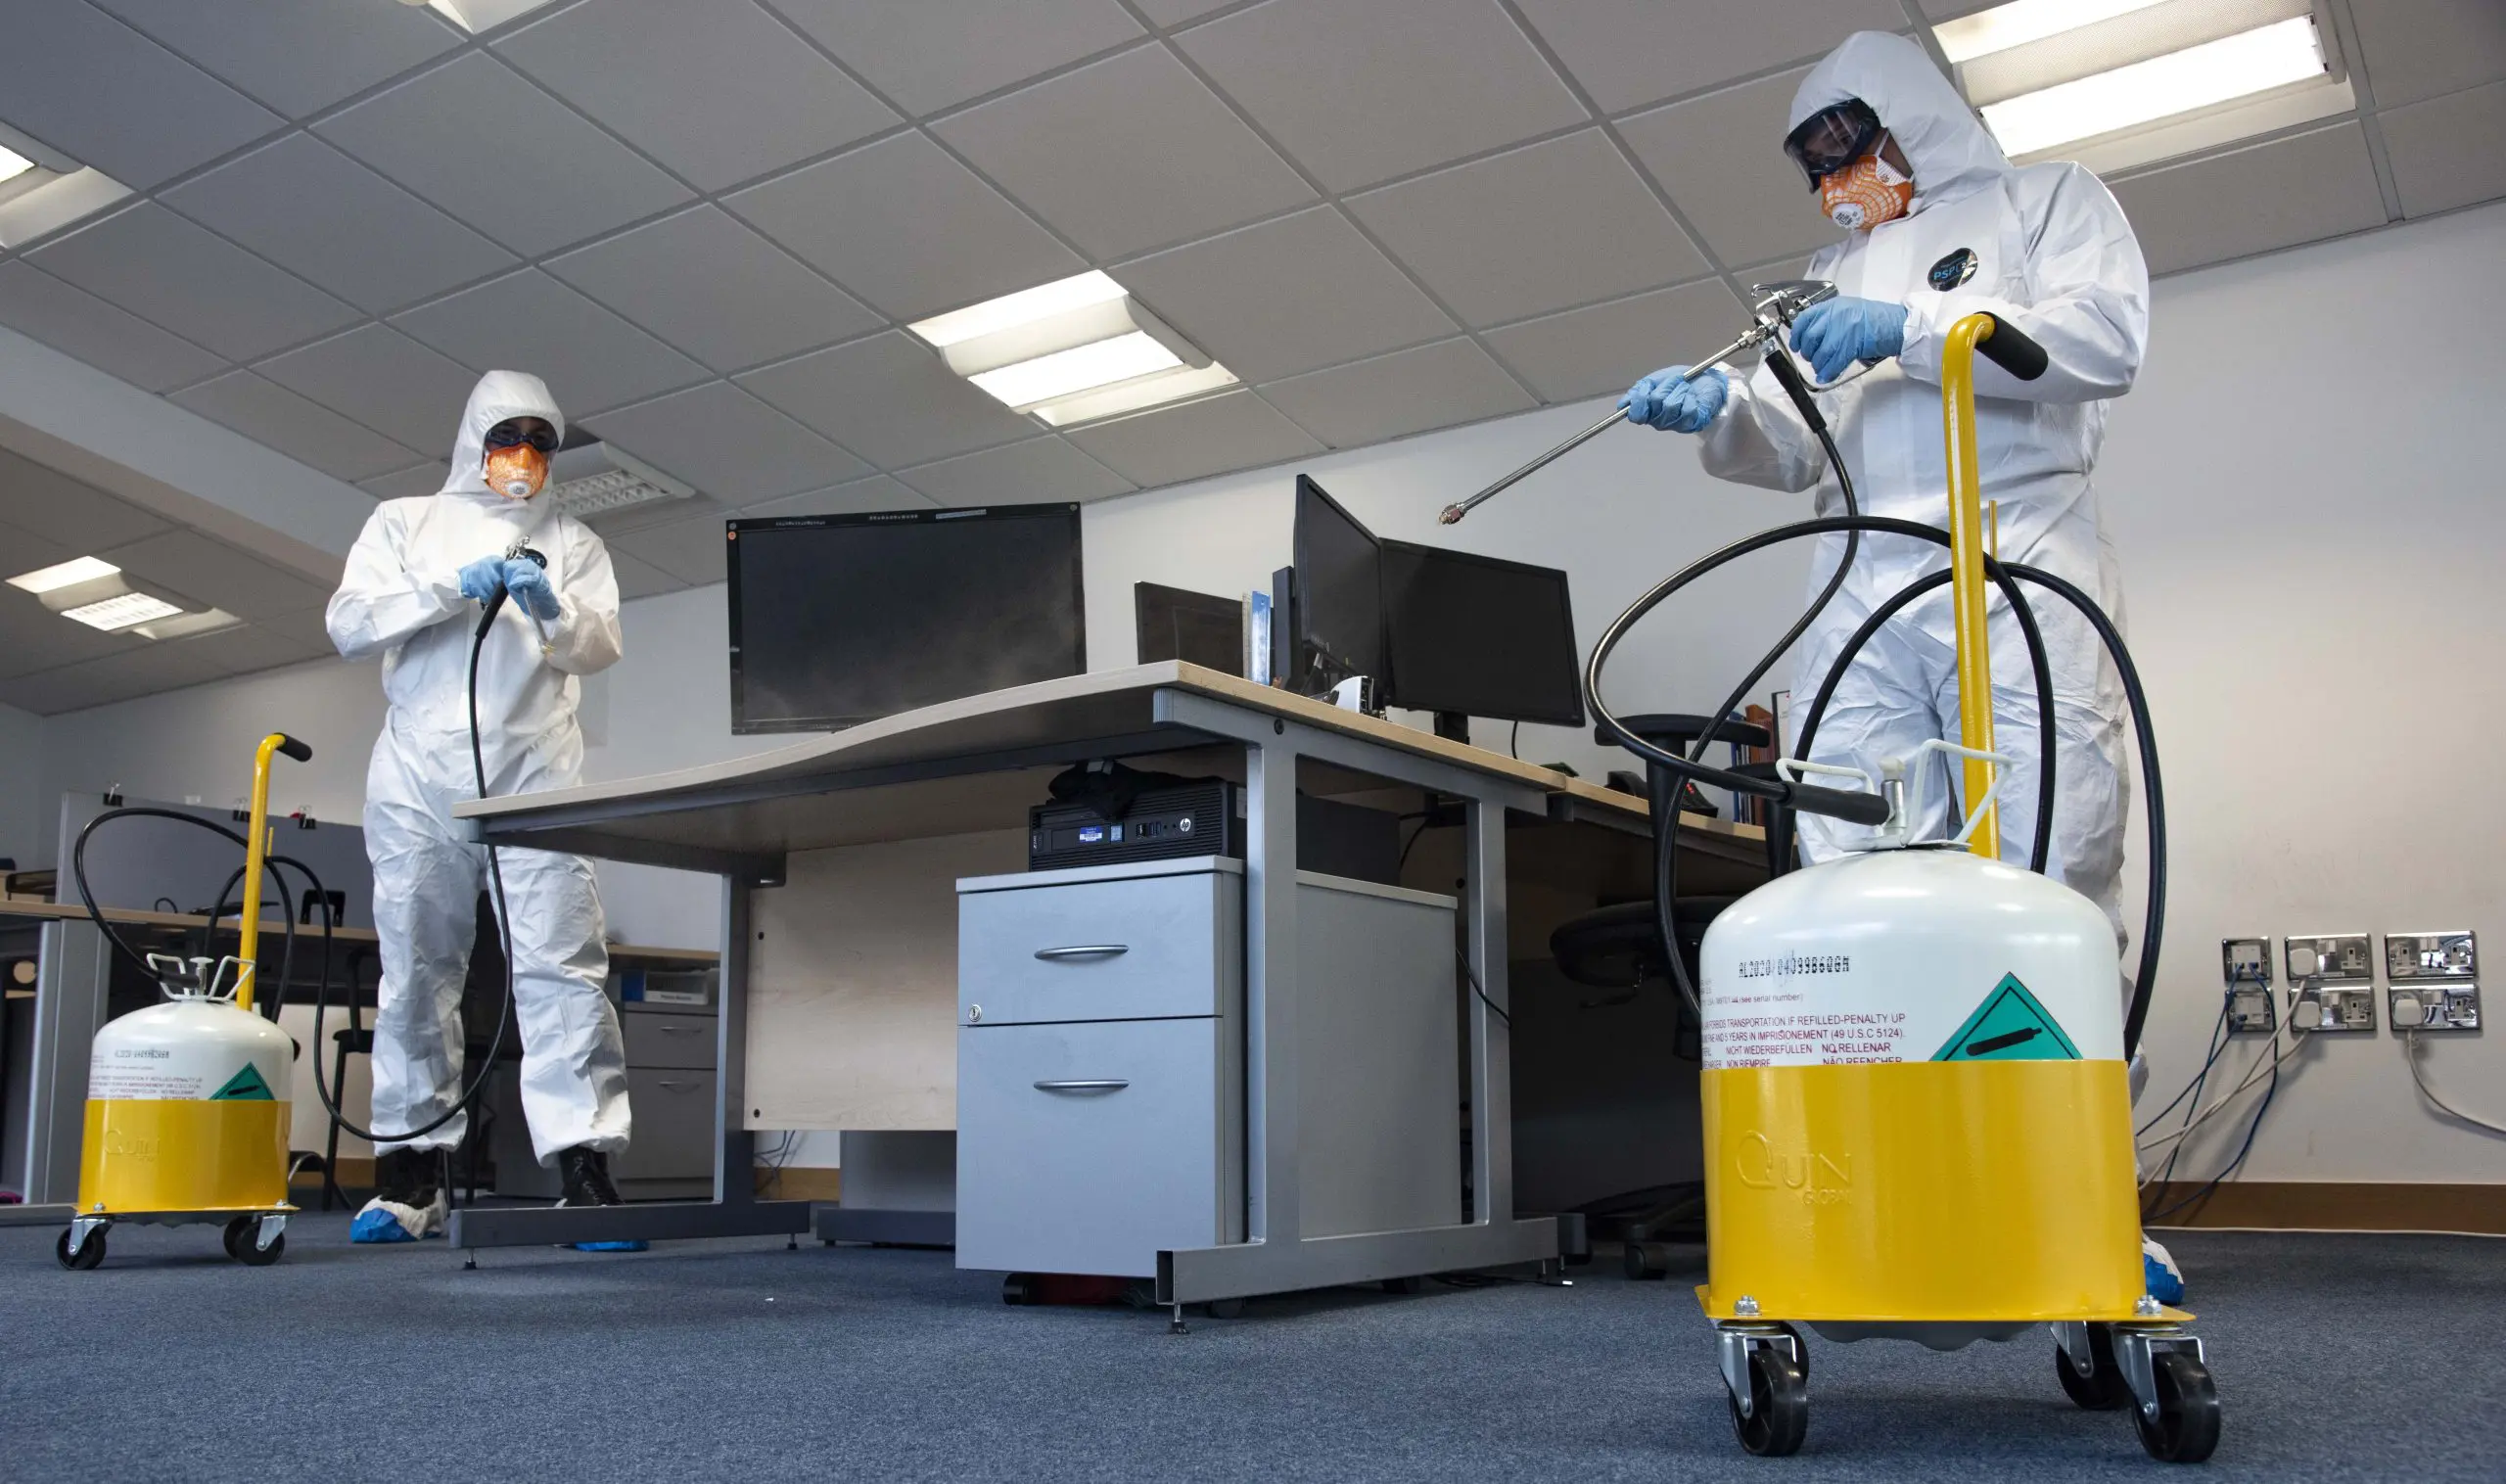 Grundon Waste Management’s Industrial Cleaning Services team use a proven treatment to kill both viruses and 99.9% of bacteria and fungi.